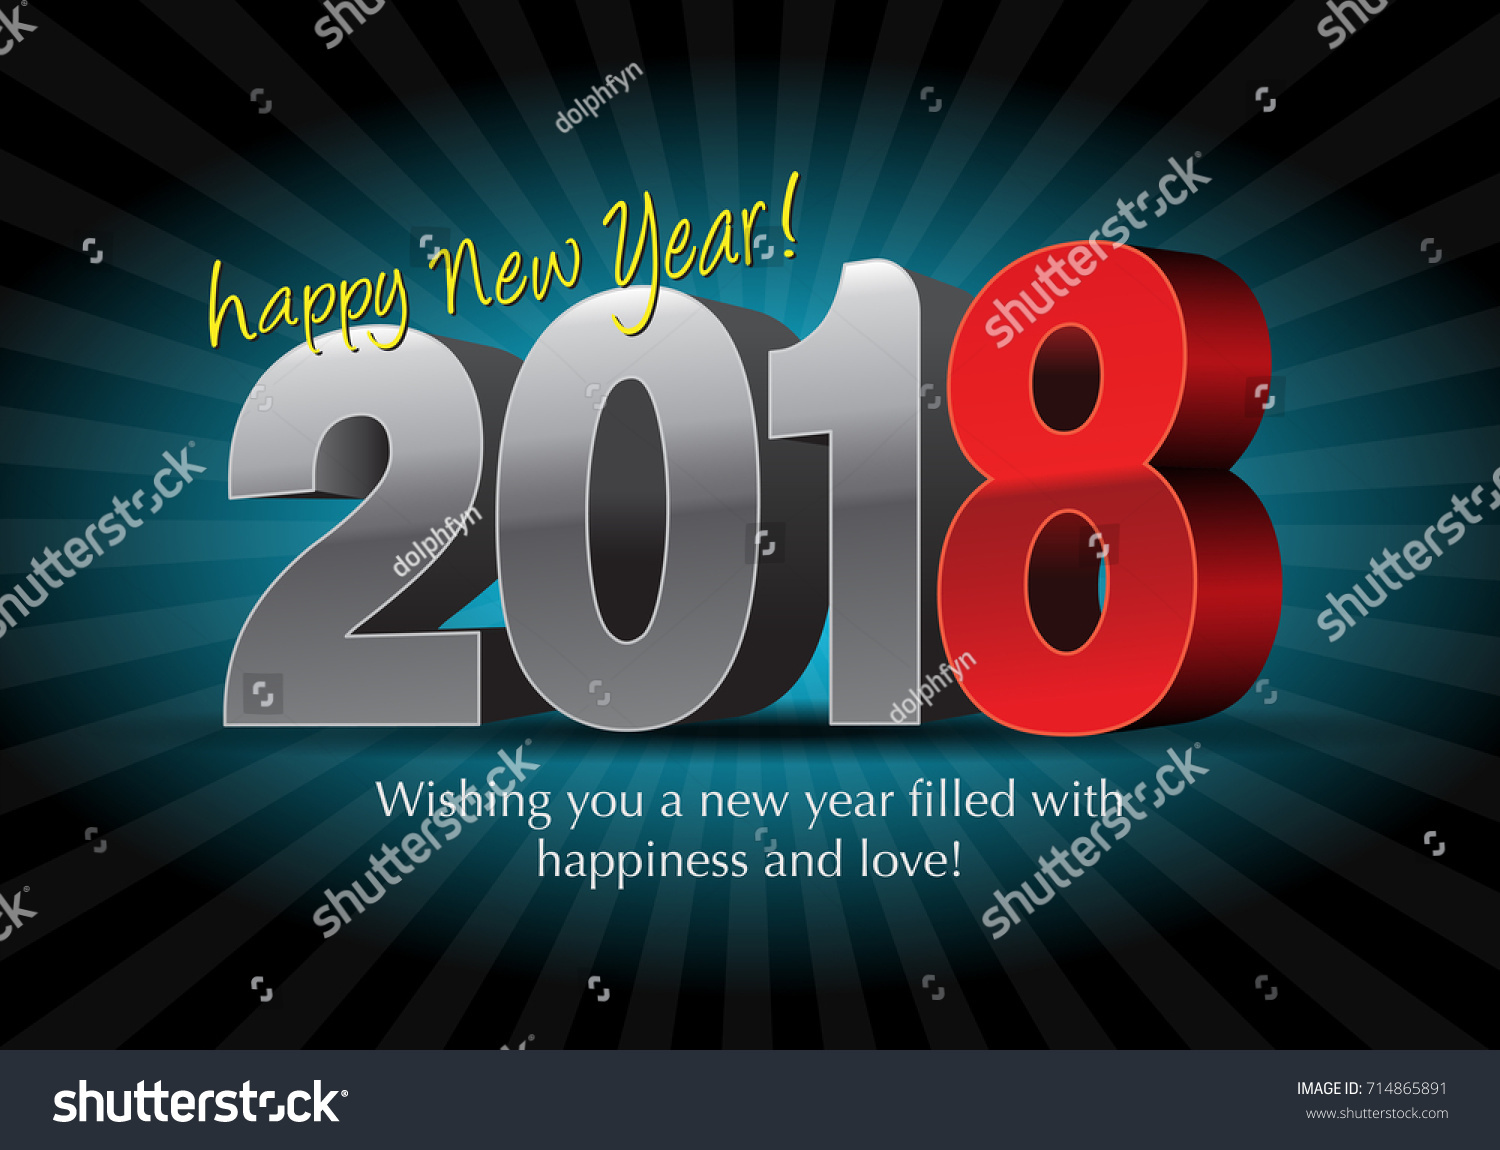 Happy New Year 2018 wish you all the best as always in this ing new